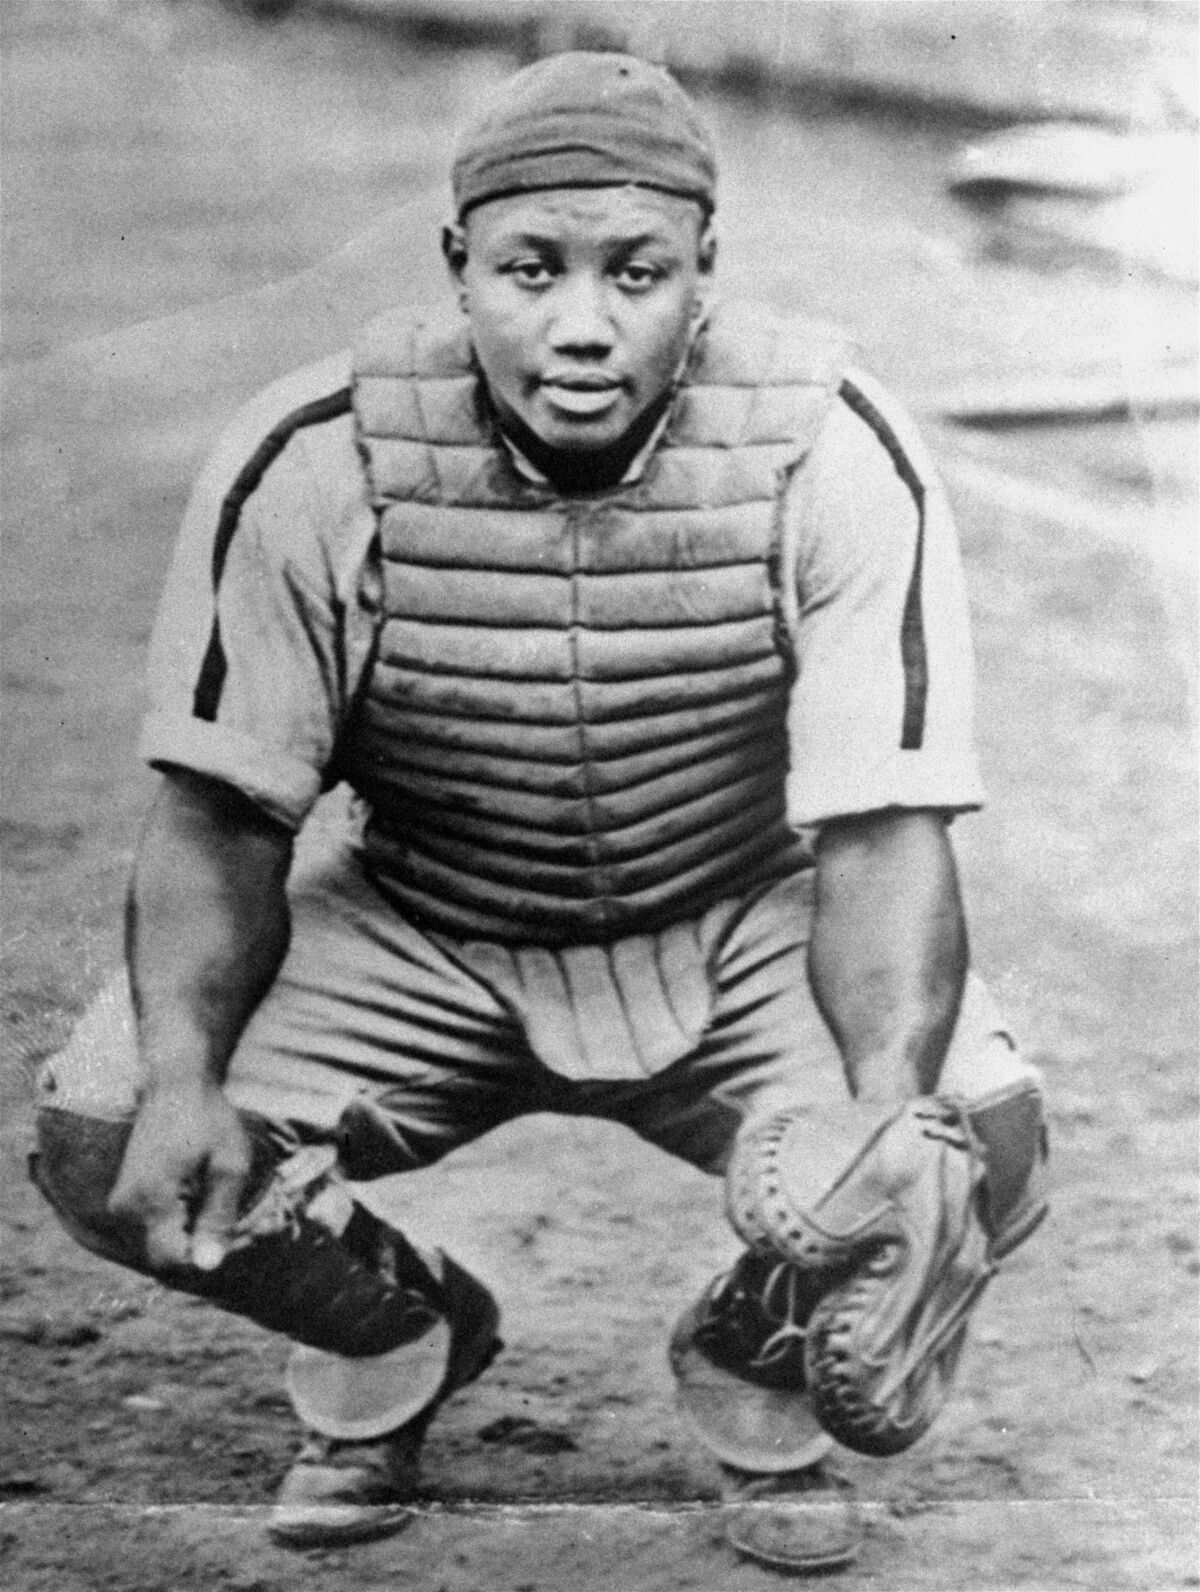 Negro Leagues legend Josh Gibson crouches on a field in catcher's gear.